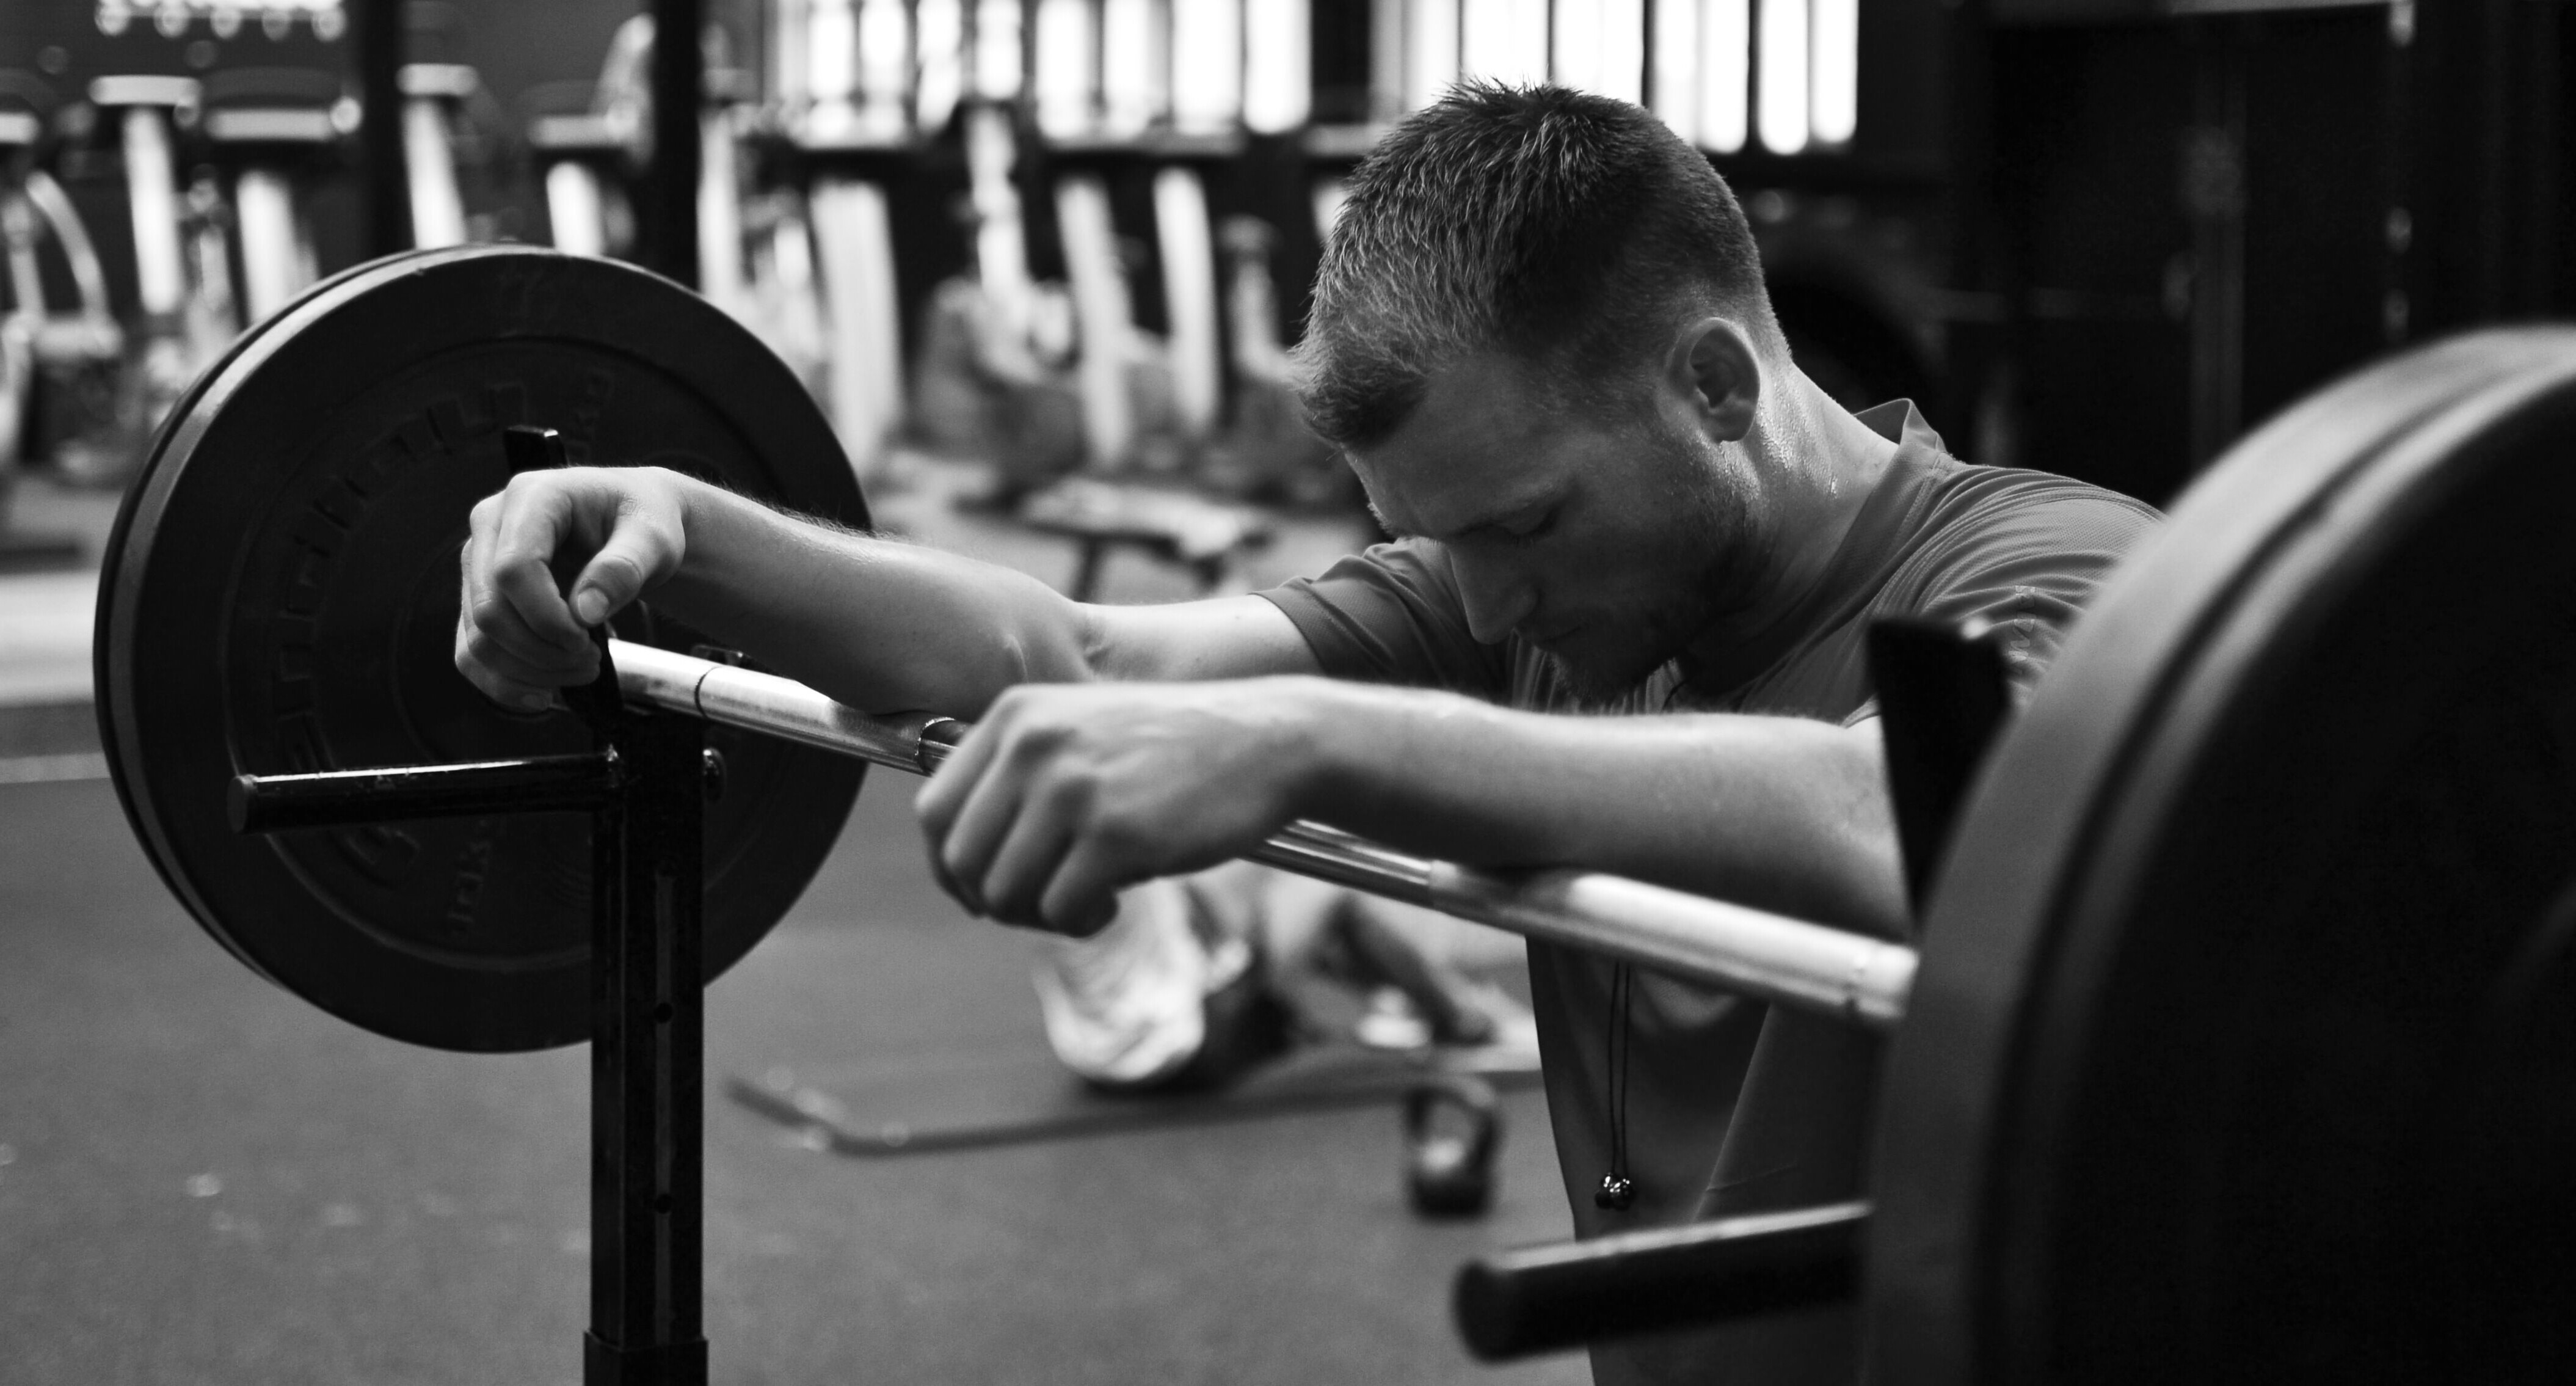 Sudden Headache While Lifting Weights: Causes and Solutions